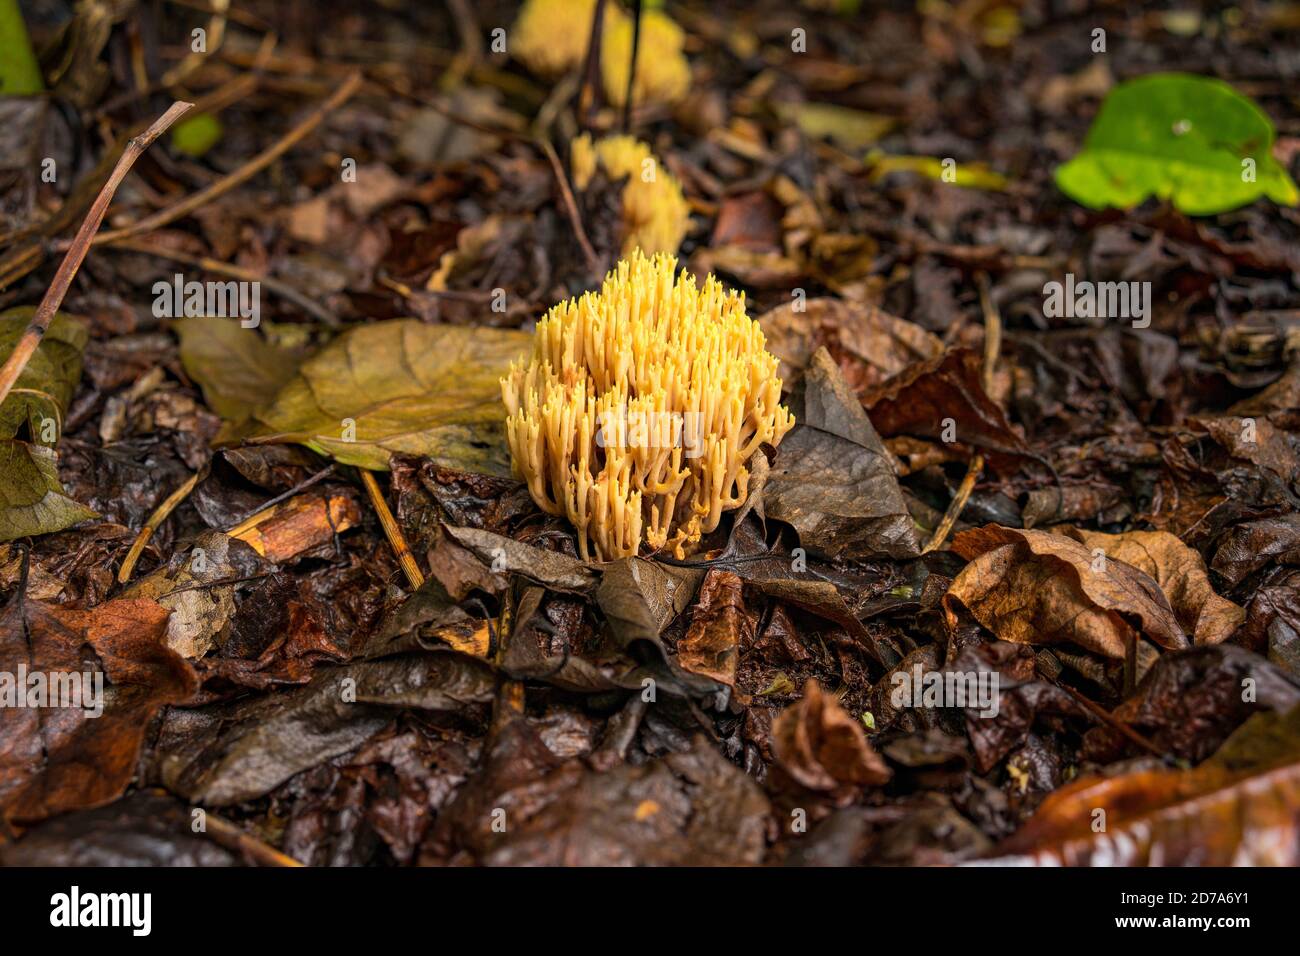 Closeup of strict-branch coral fungus and autumn dirty leaves on the ground Stock Photo